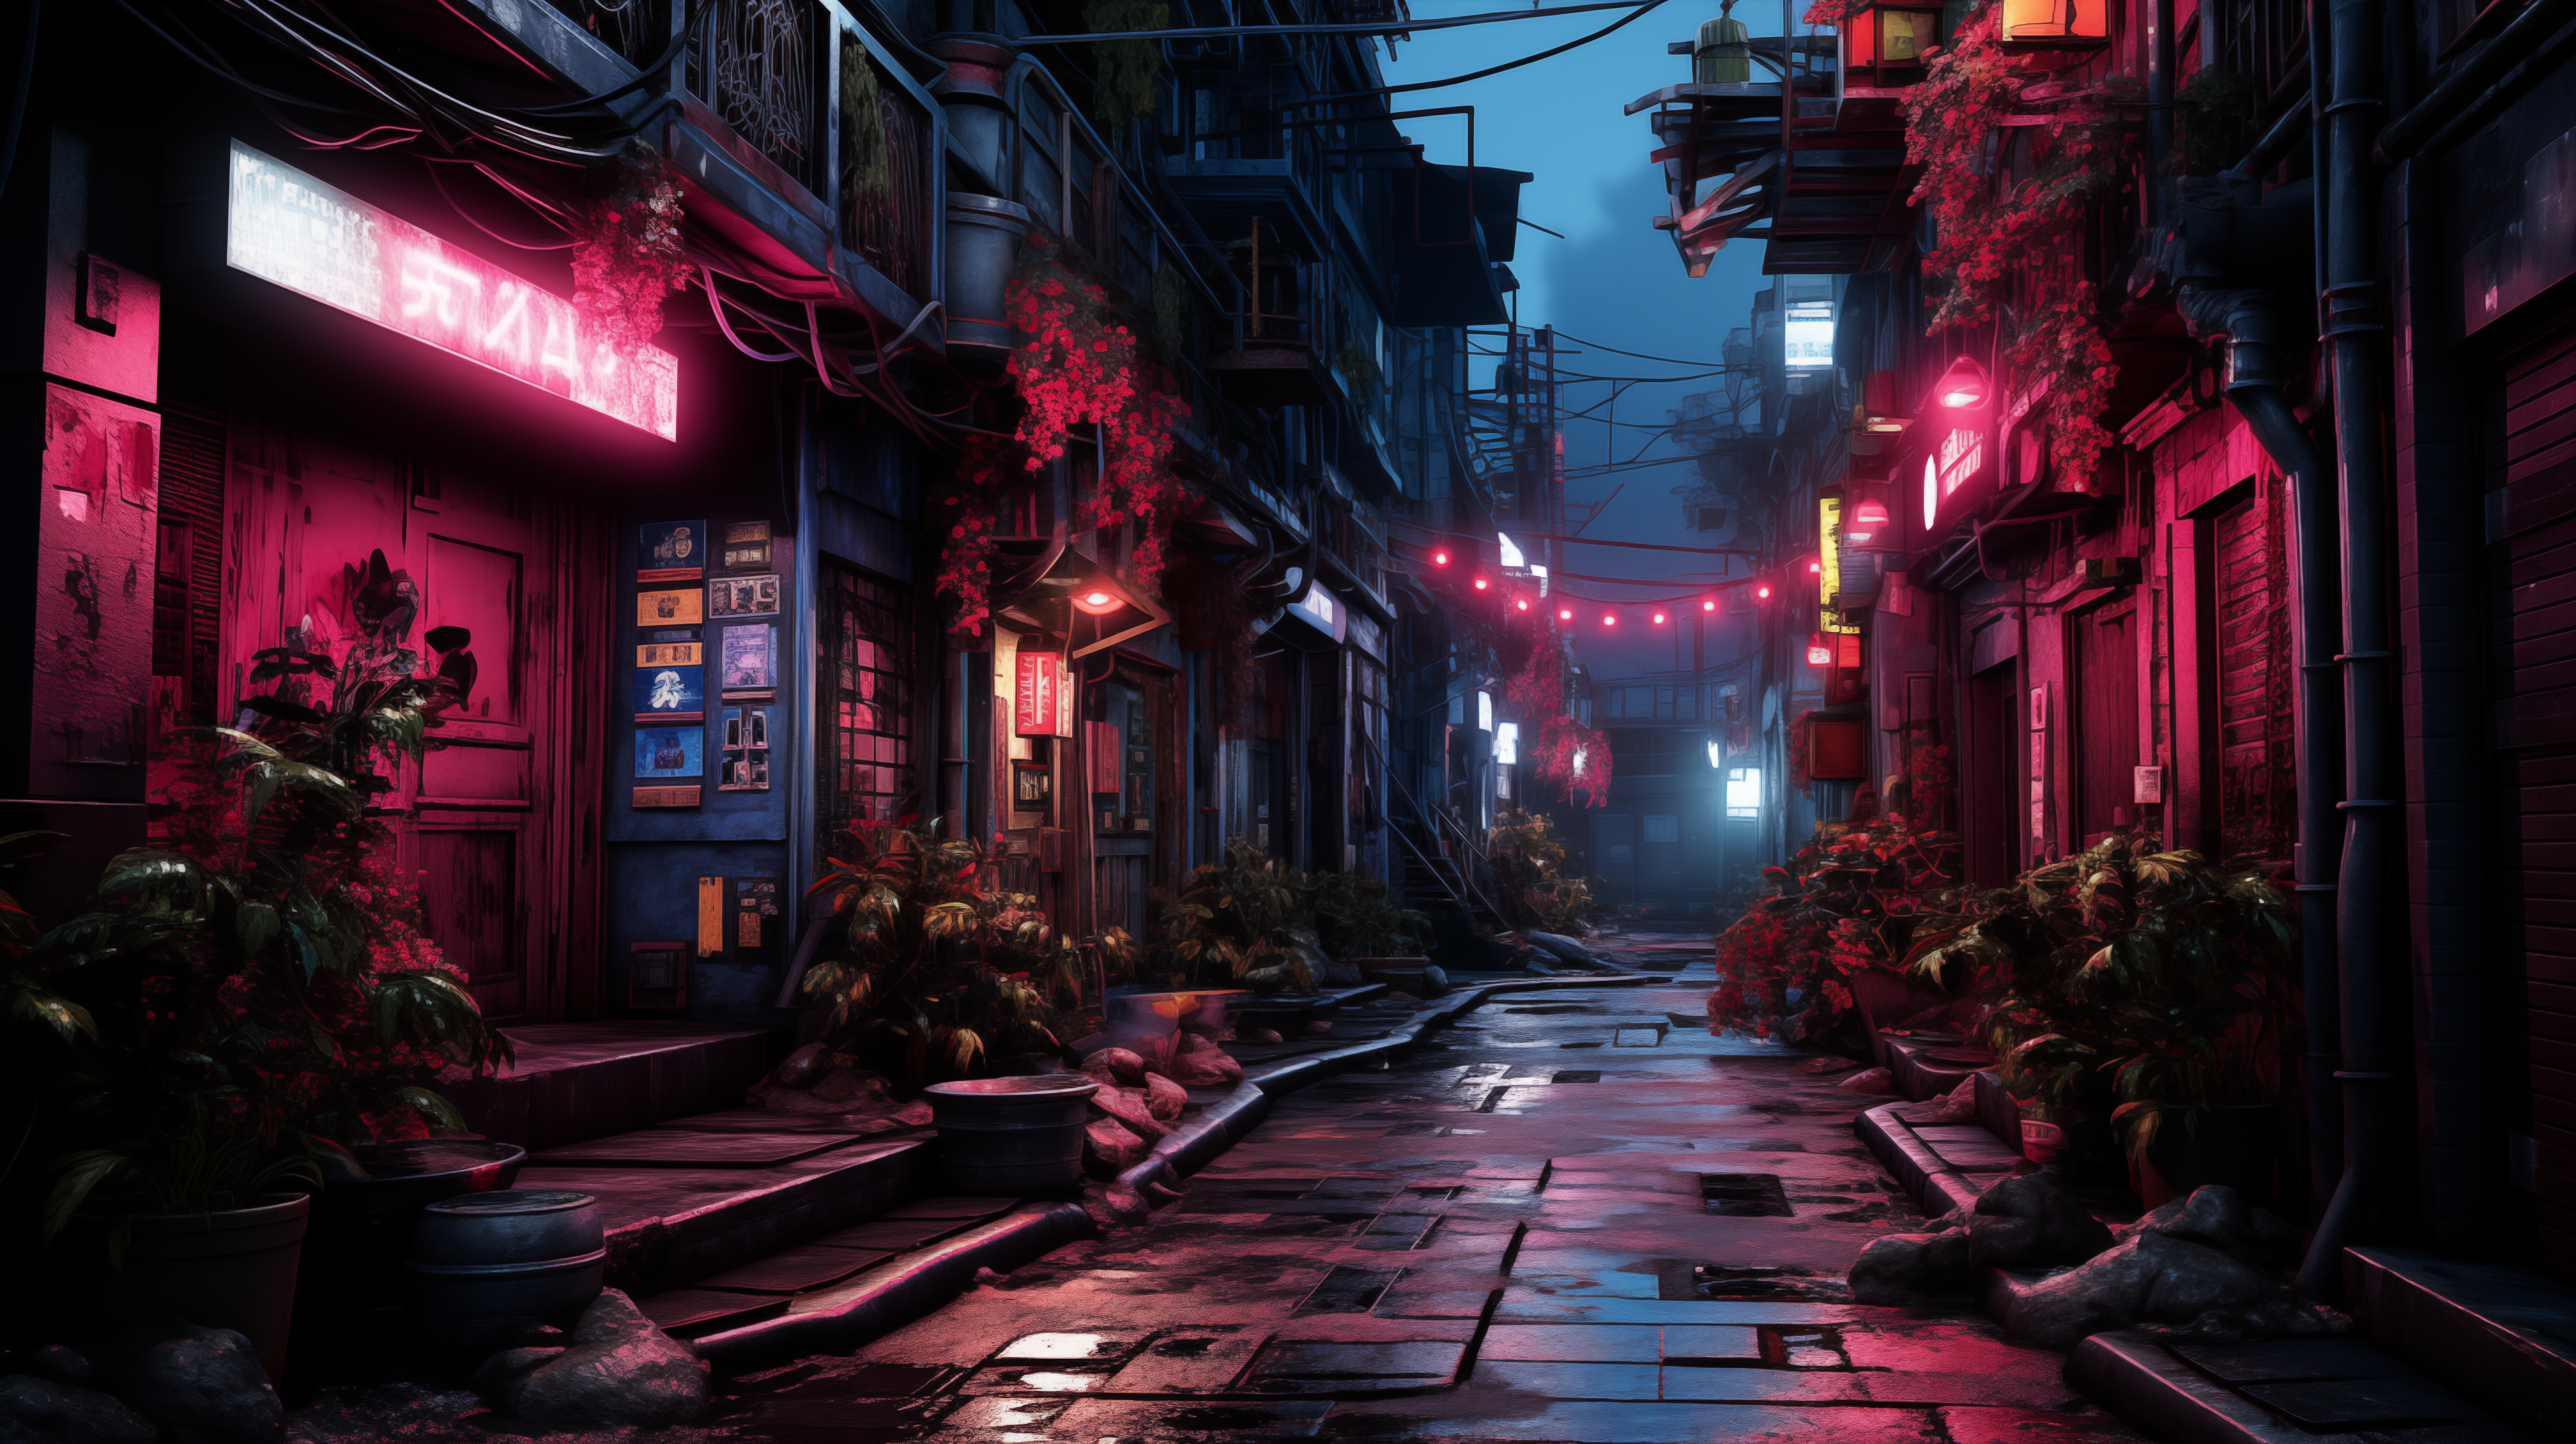 HD desktop wallpaper of a moody alleyway at night illuminated by neon signs, providing a cinematic urban background setting.